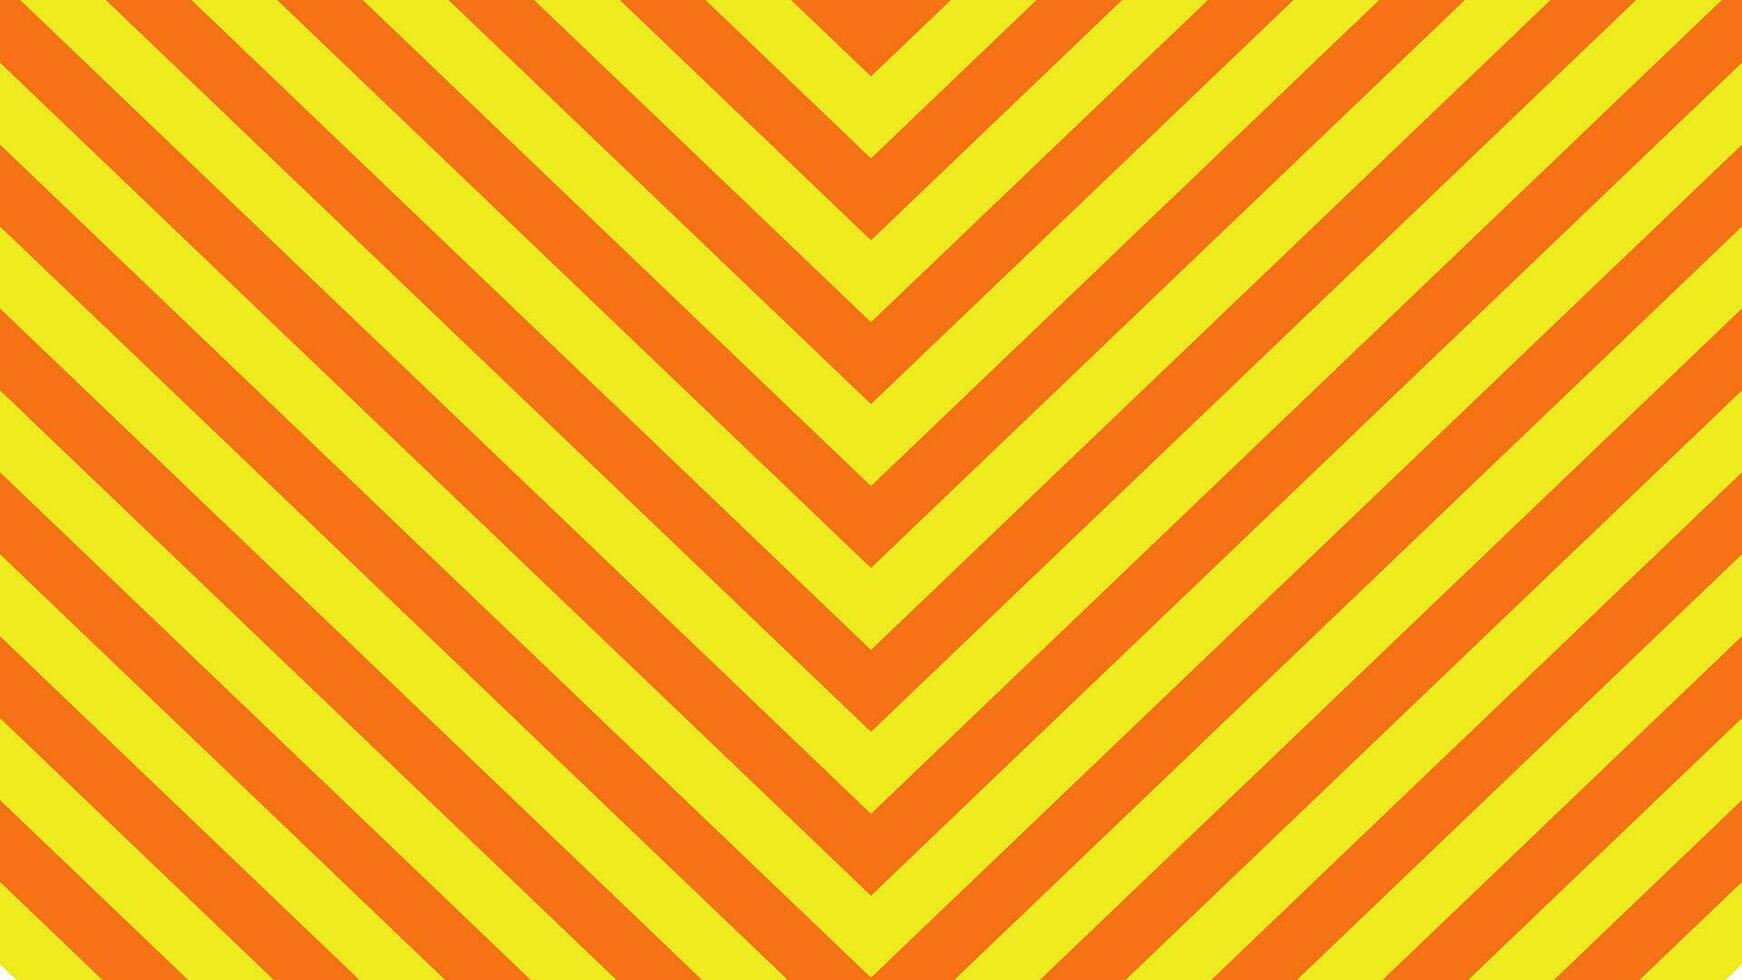 Emergency yellow orange, striped background of rescuers, helping injured emergency vector